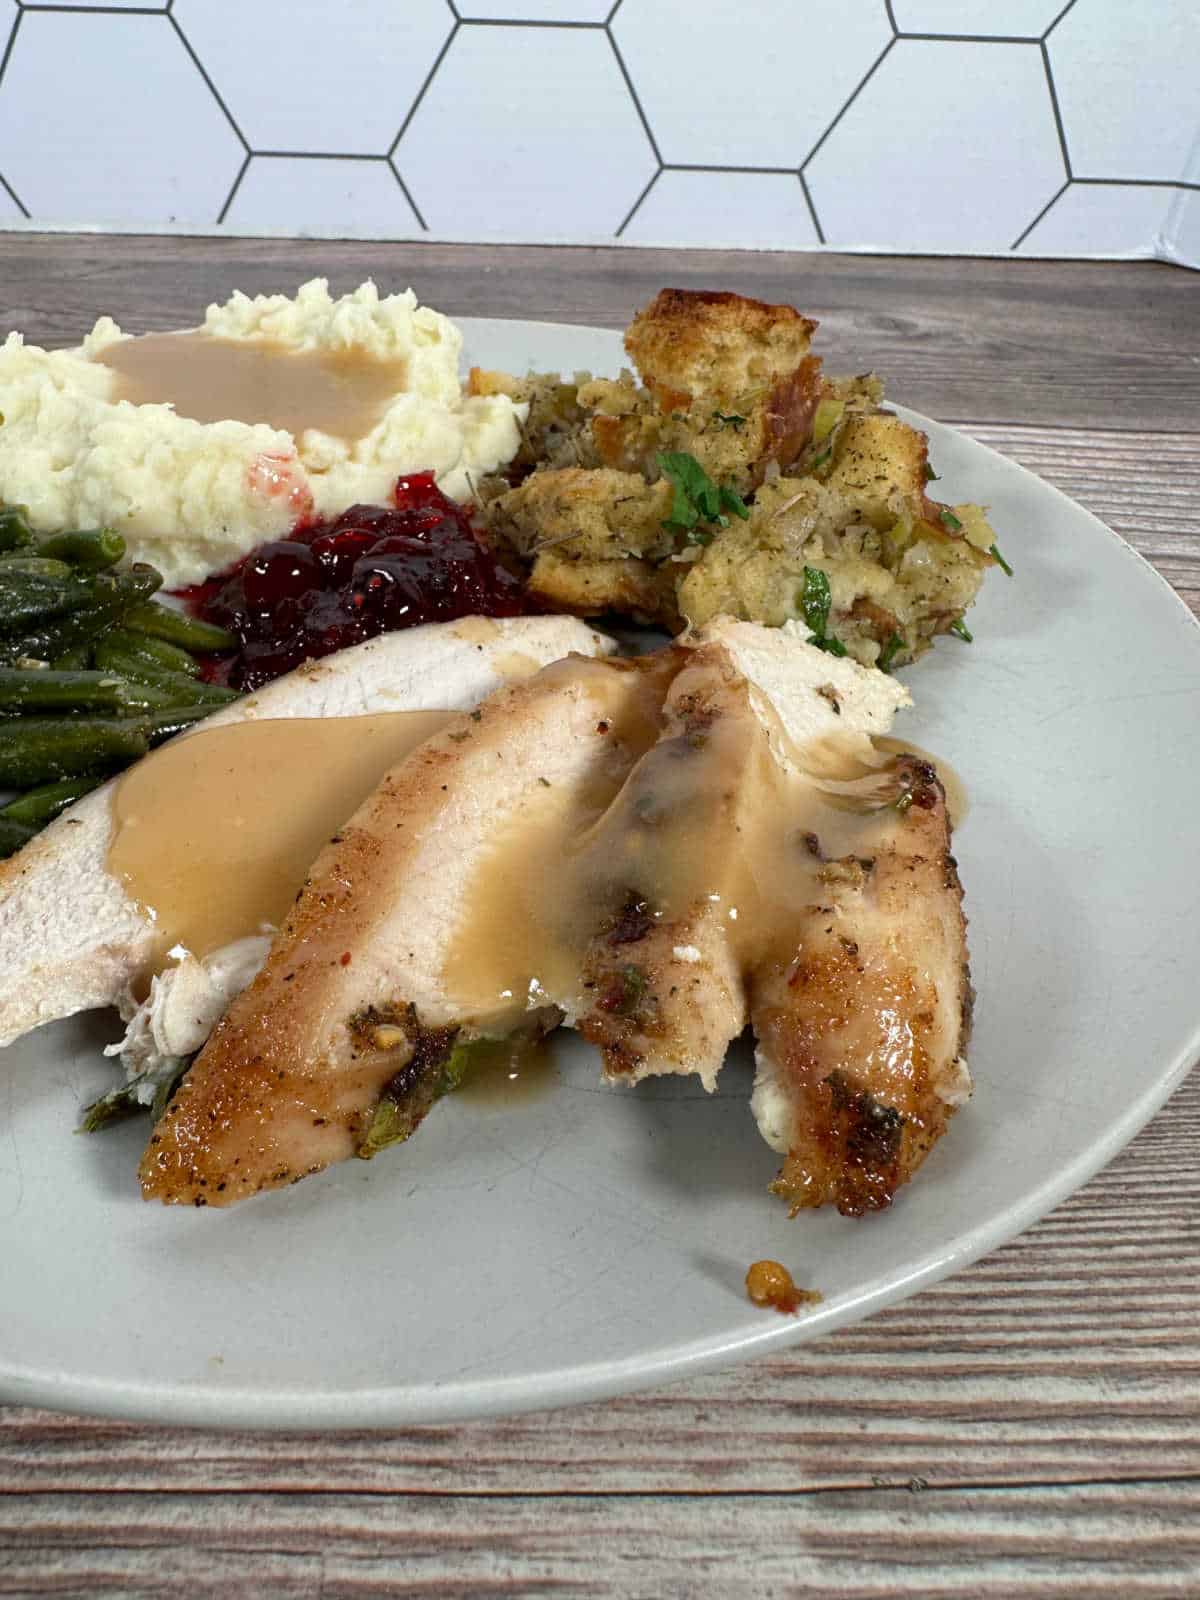 Slices of turkey, topped with gravy sit on a plate surrounded by traditional Thanksgiving side dishes.